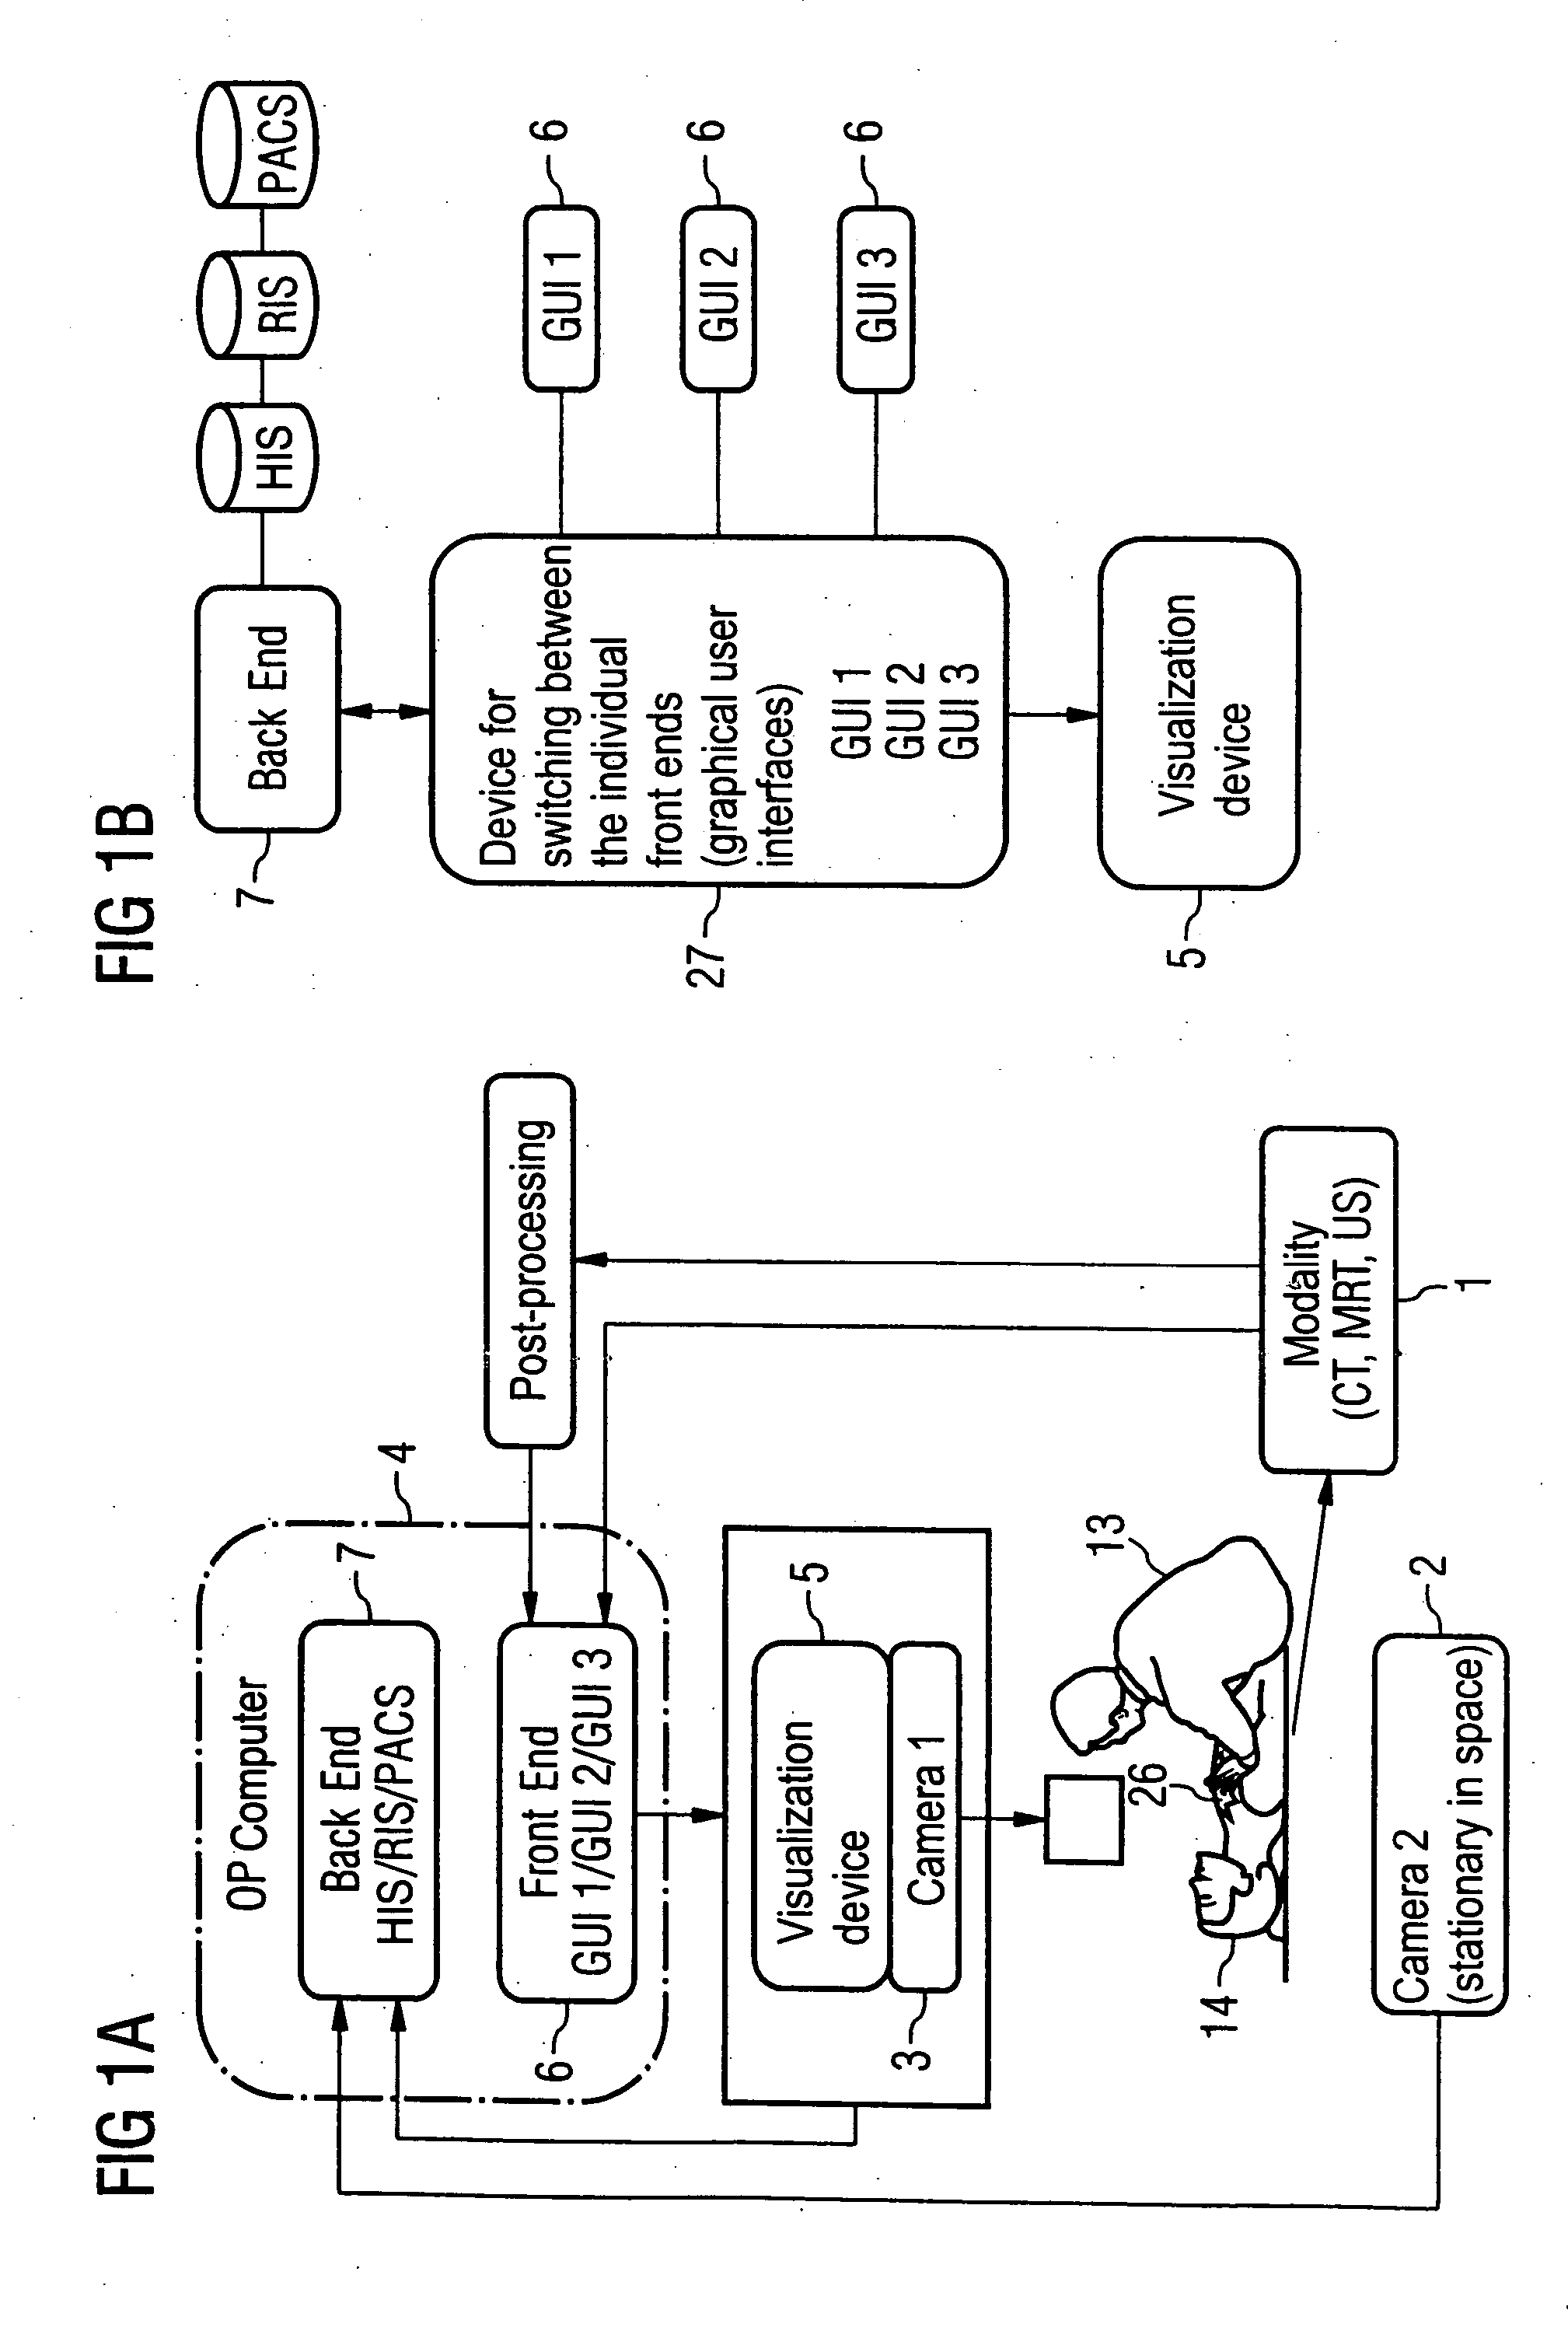 System for providing situation-dependent, real-time visual support to a surgeon, with associated documentation and archiving of visual representations